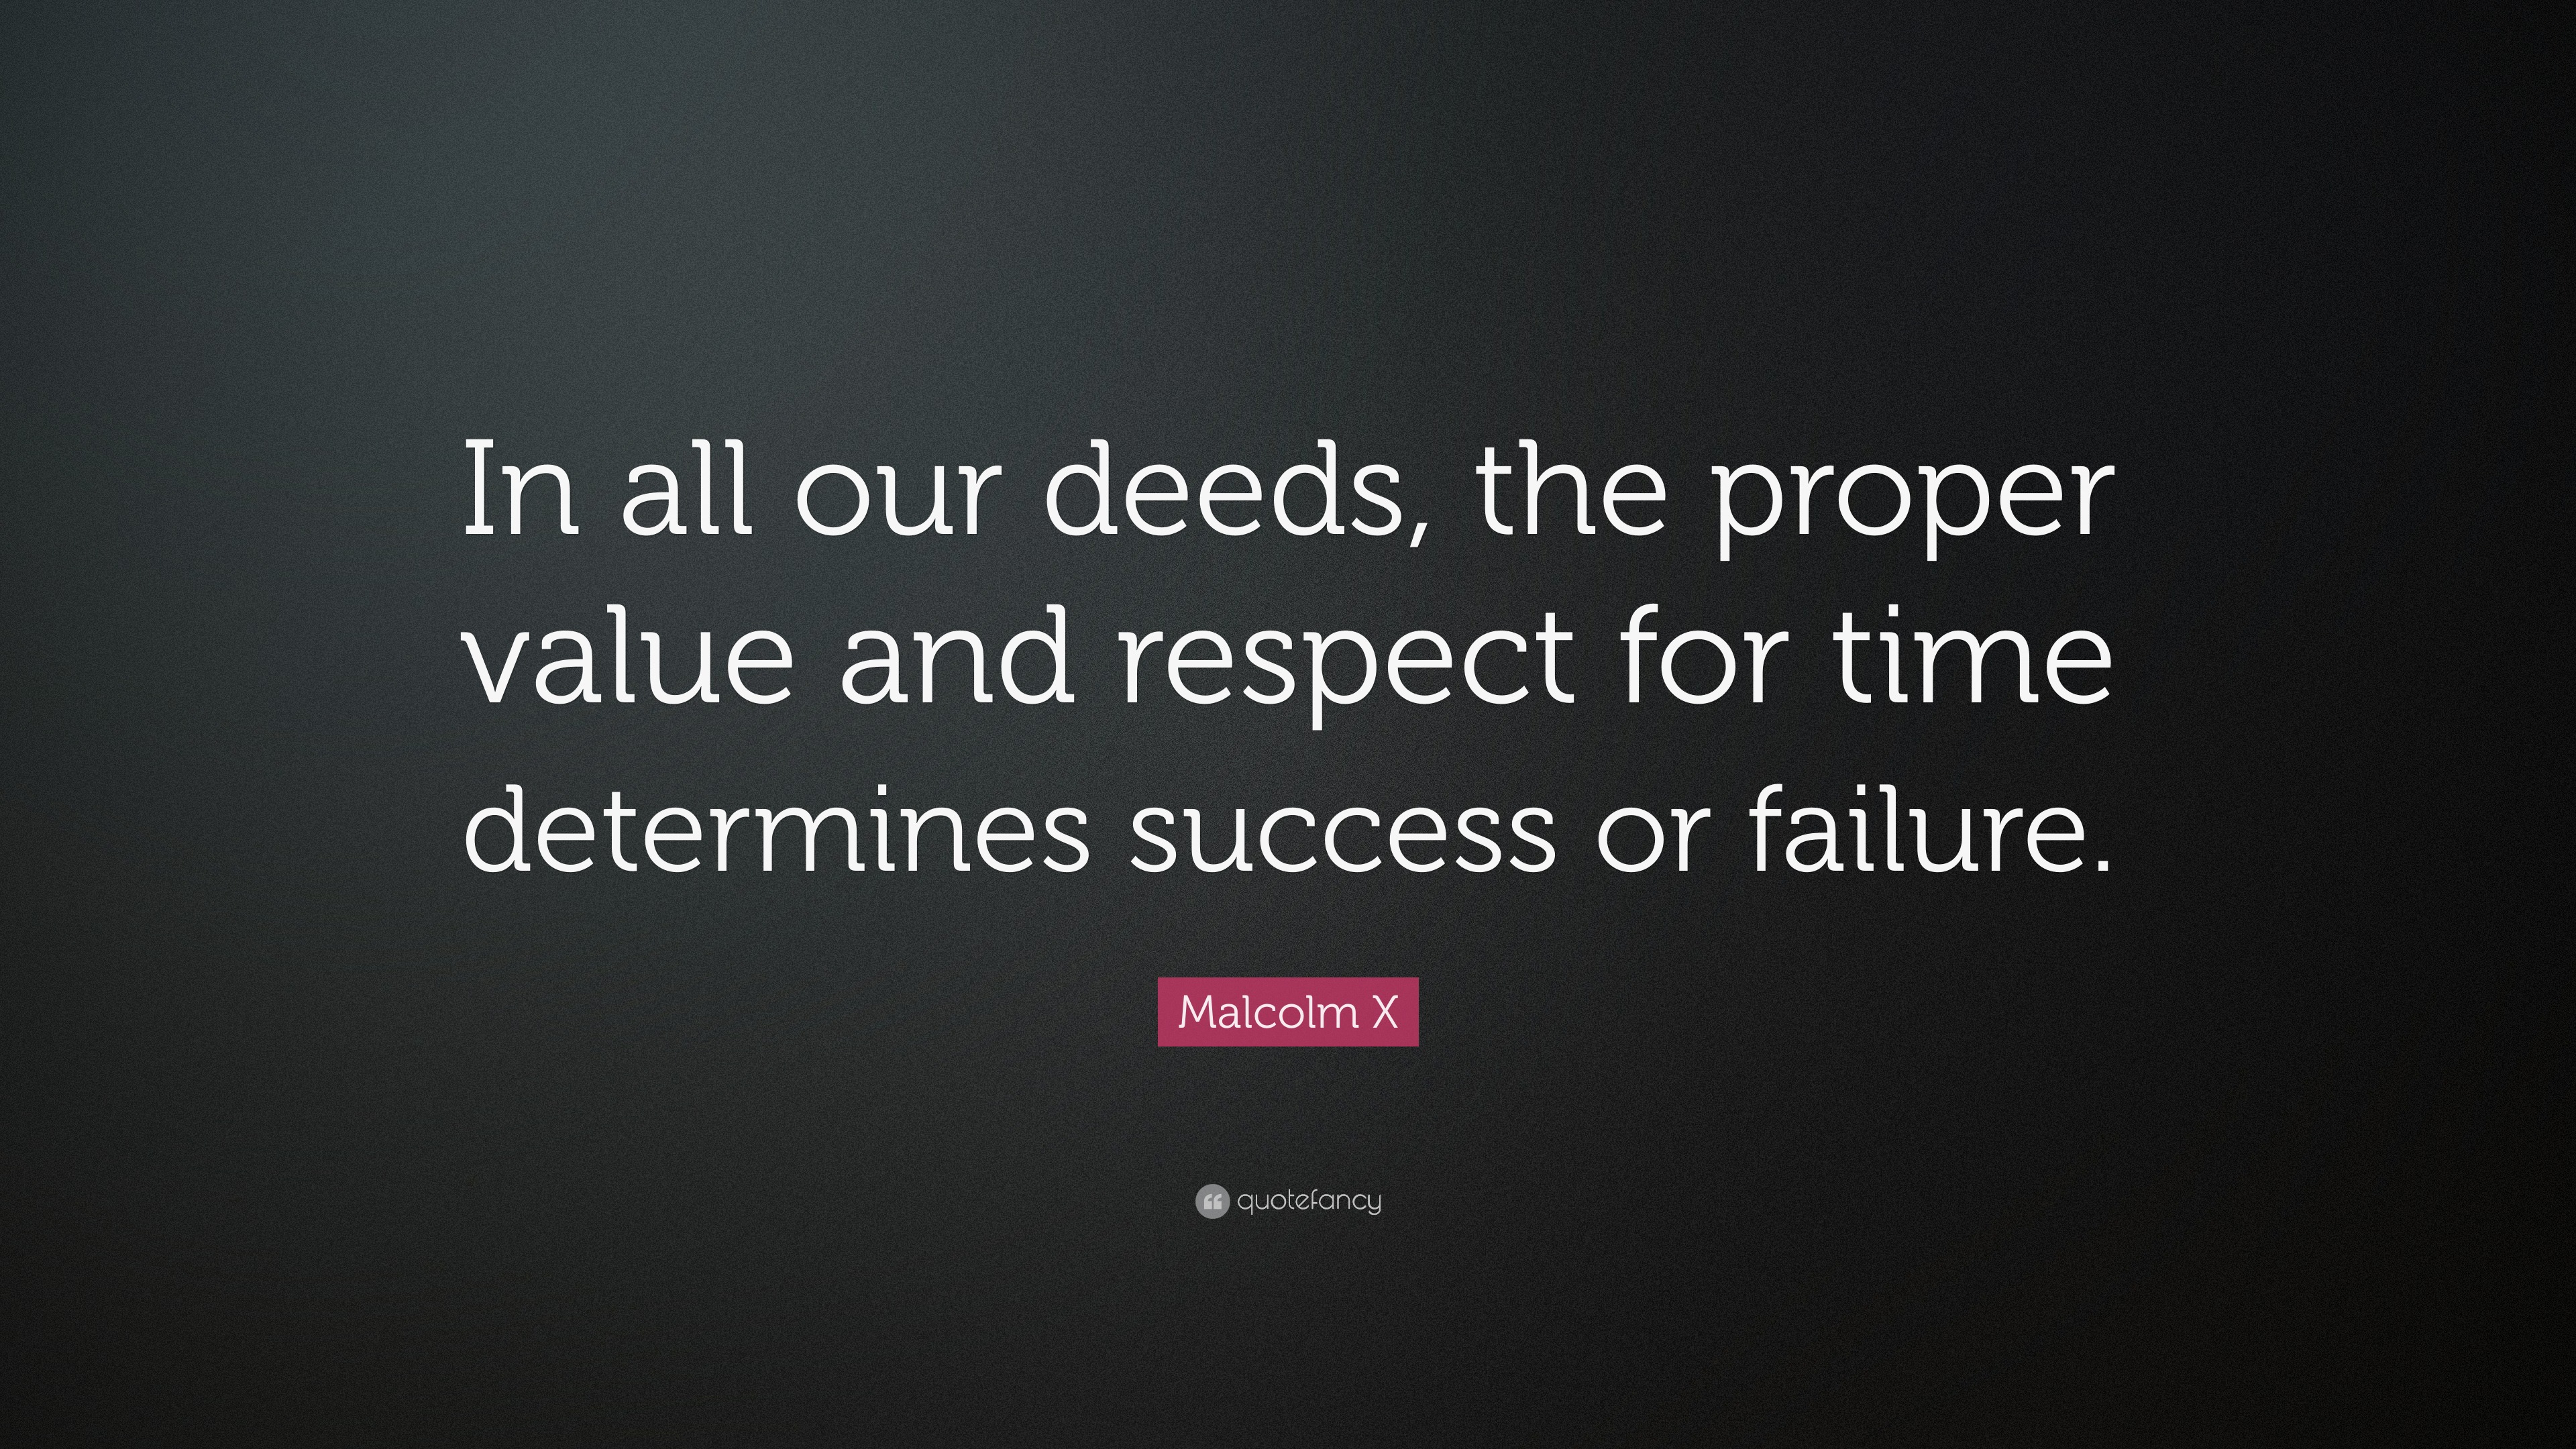 Malcolm X Quote: “In all our deeds, the proper value and respect for ...